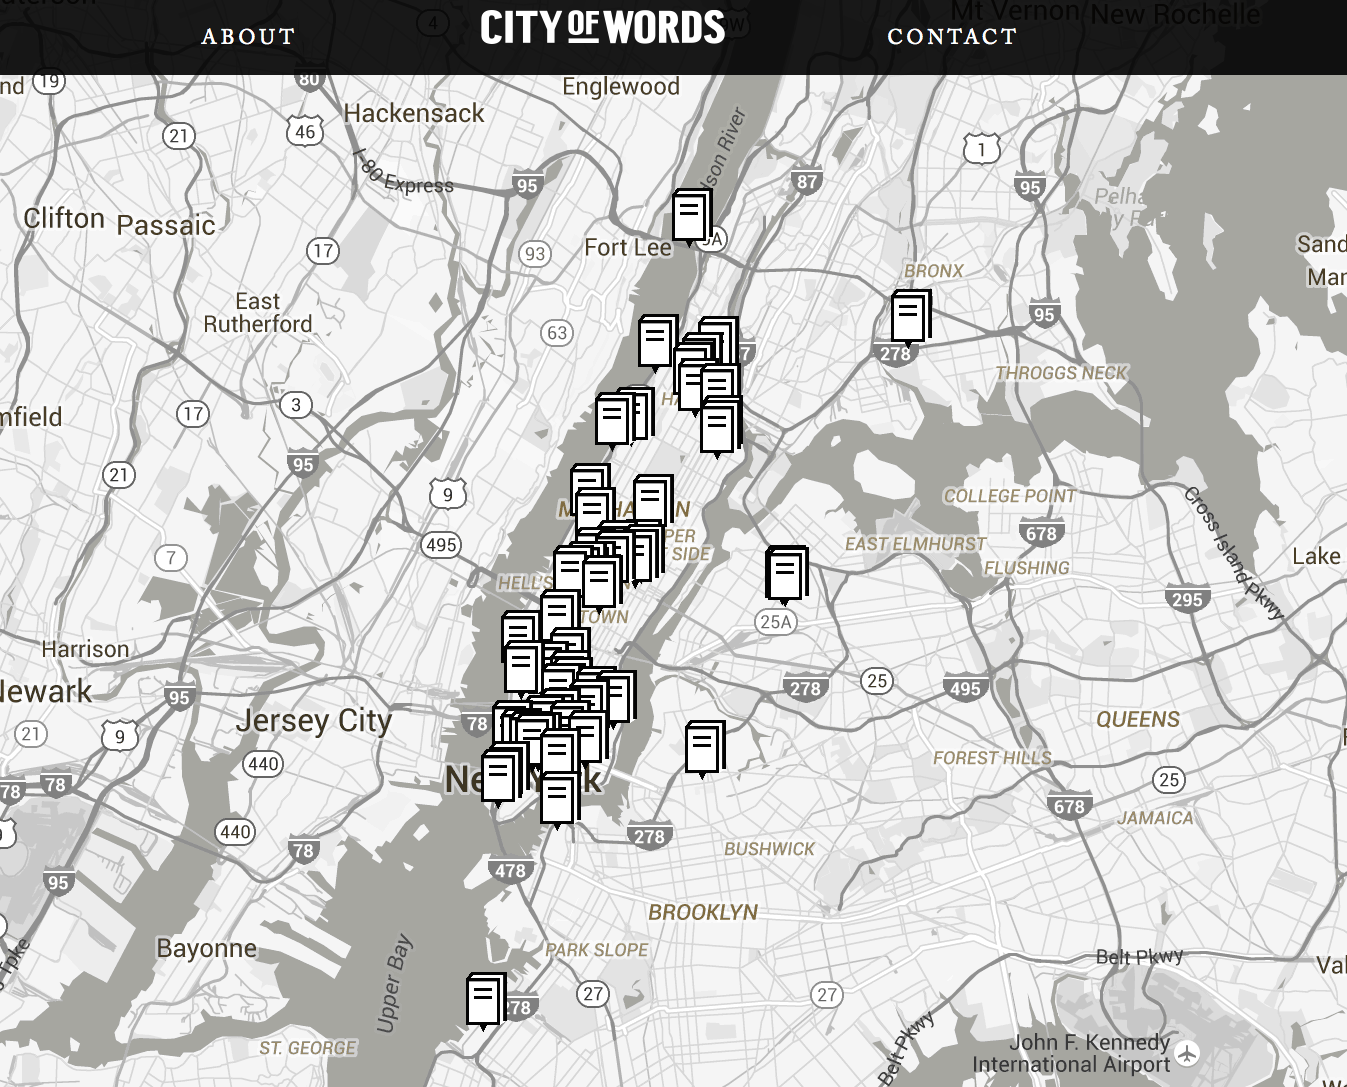 Screen Grab from City of Words Website